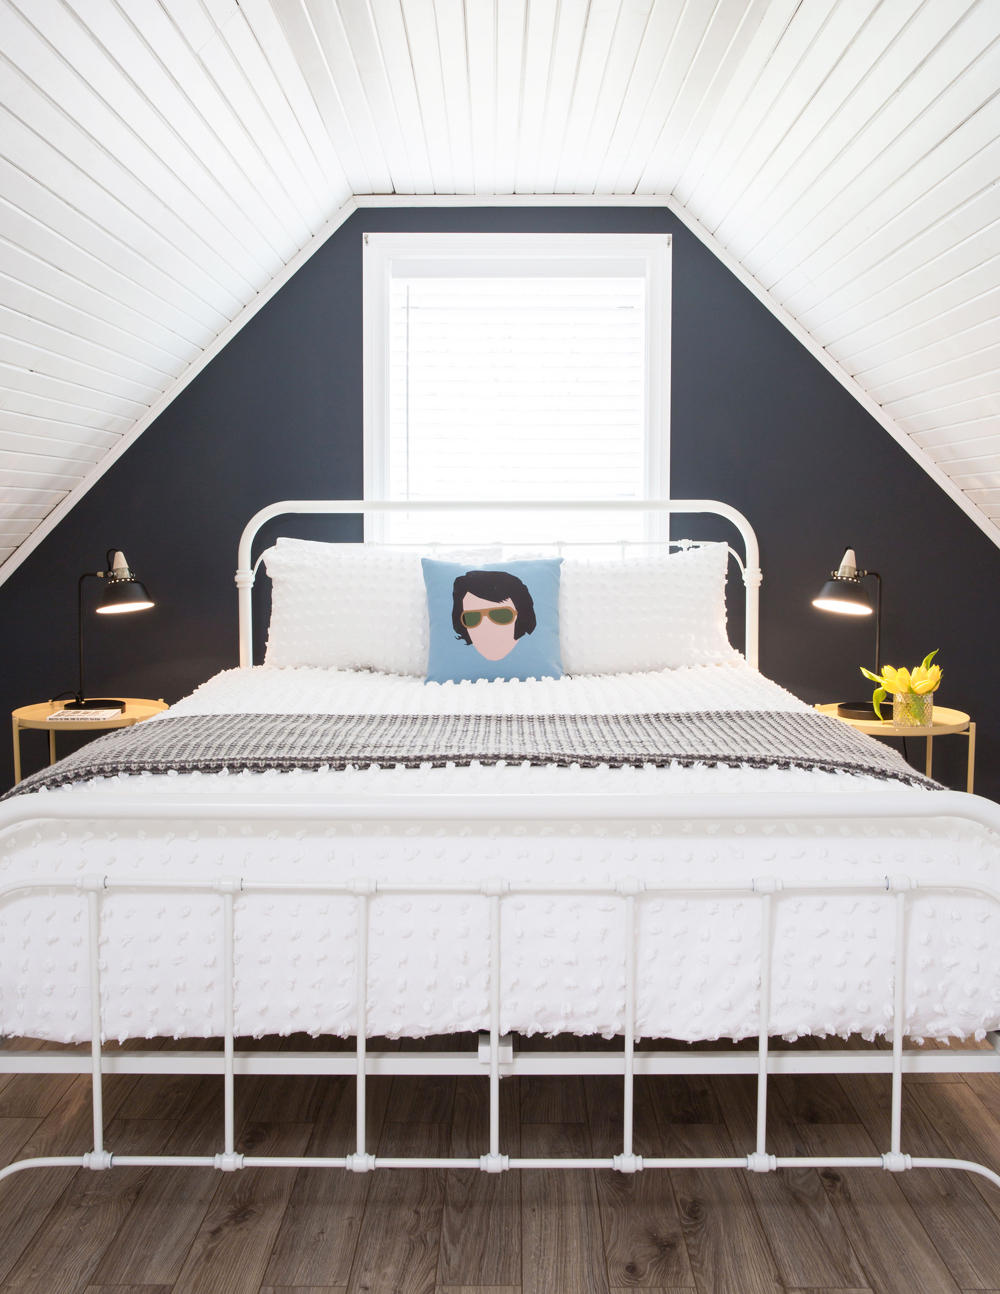 A renovated attic space converted into a guest bedroom